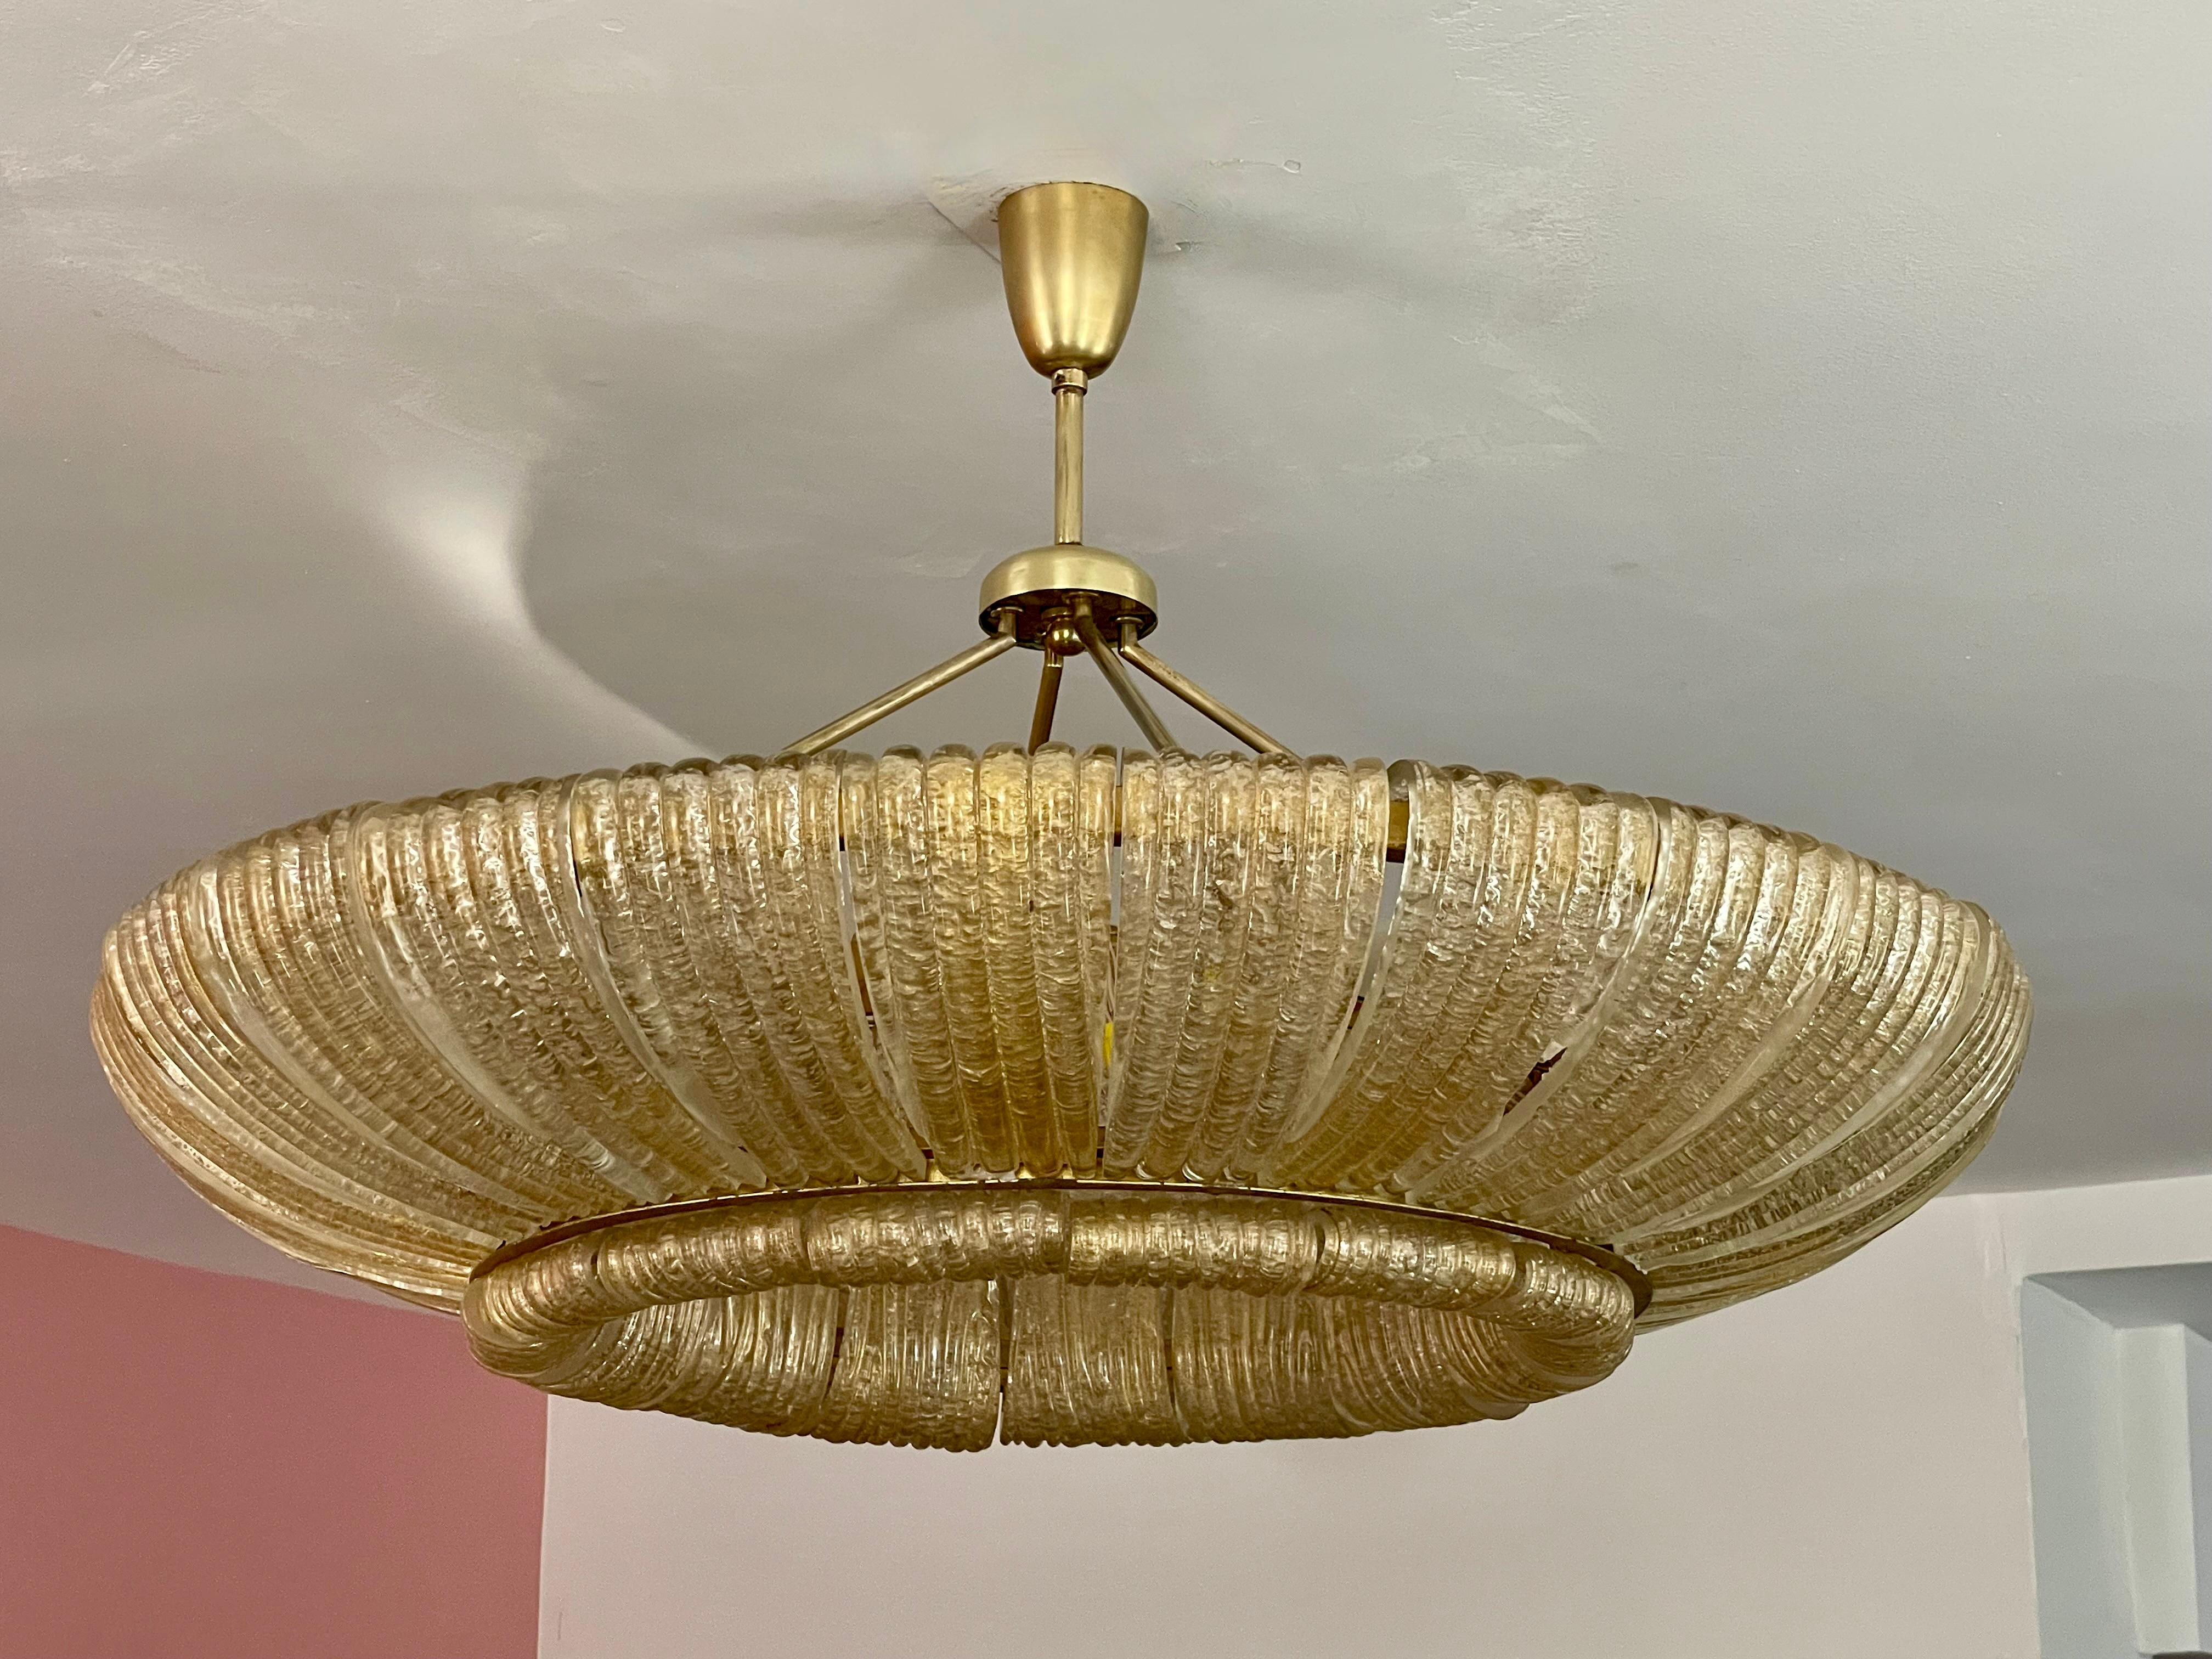 This late 1930s Venini chandelier has two rings of curved-glass elements suspended from a brass frame.  It appears to glow magically from within because the glass elements are infused with gold leaf.  Tiny glass chips are fused on the inner surface